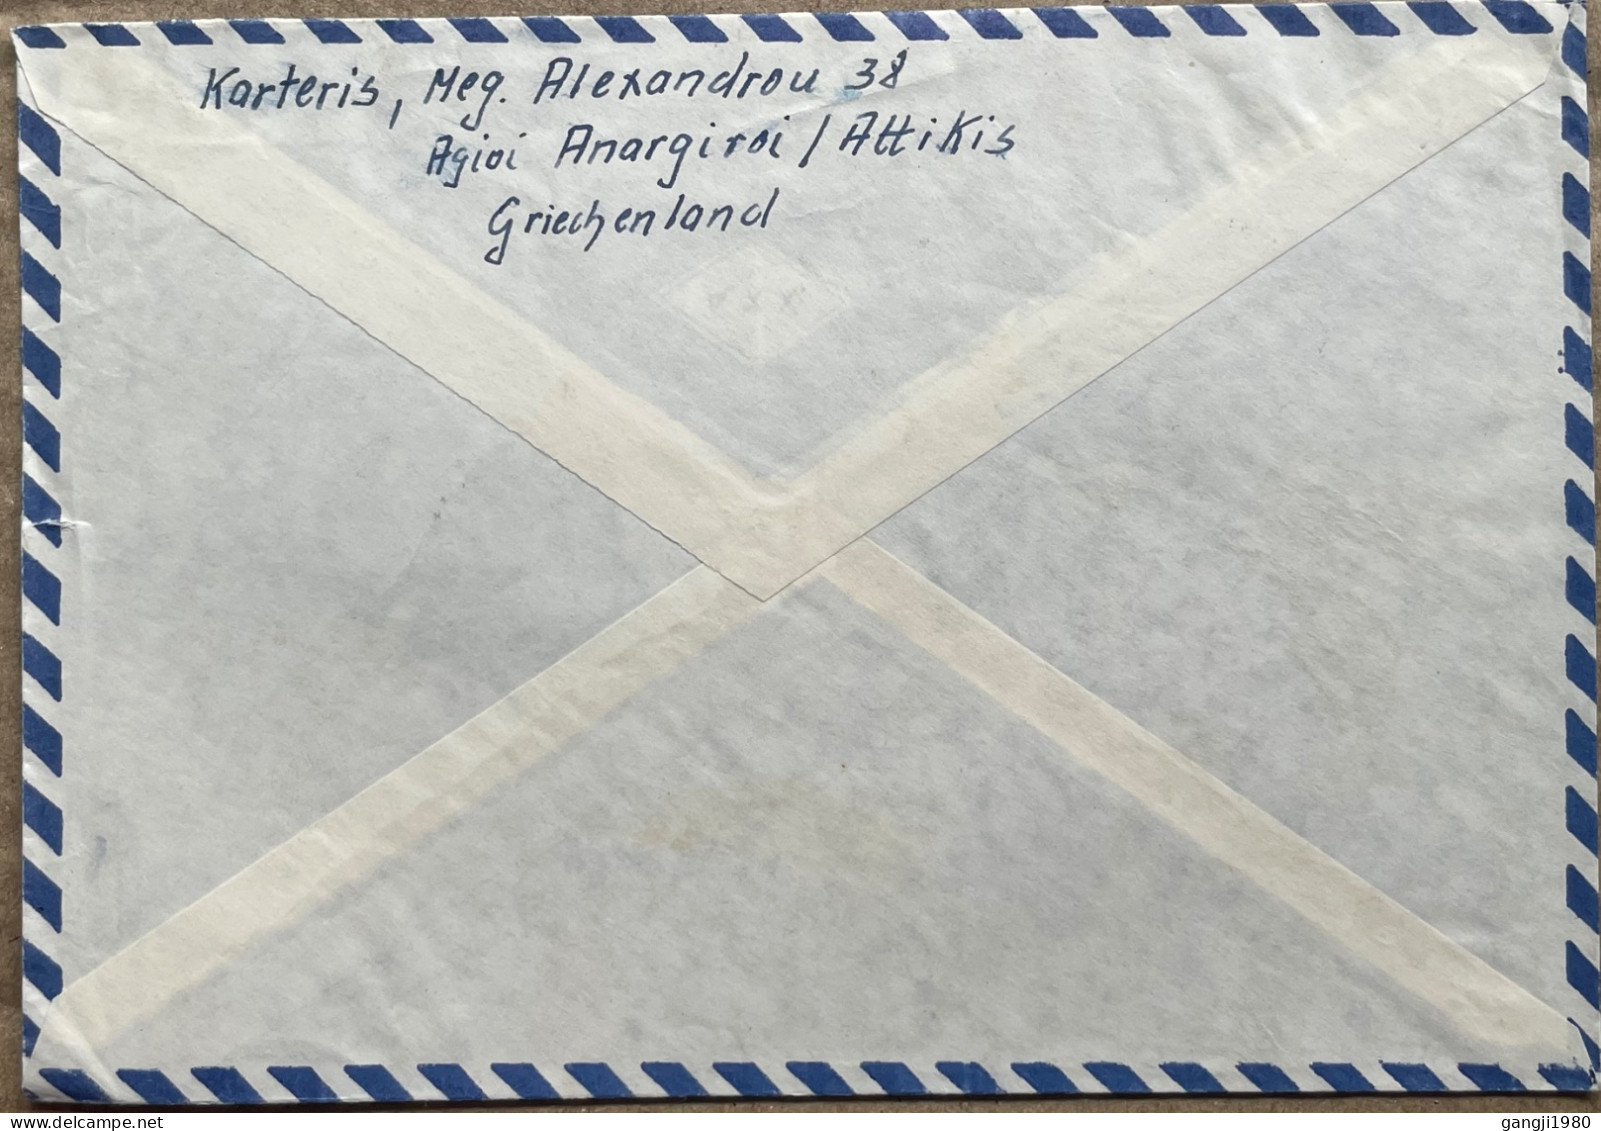 GREECE 1968, COVER USED TO GERMANY, BOXED RETURN FOR PAYMENT OF RE MAILING, 3 DIFF STAMP, RHODE MONUMENT, AIR FORCE AIRC - Storia Postale